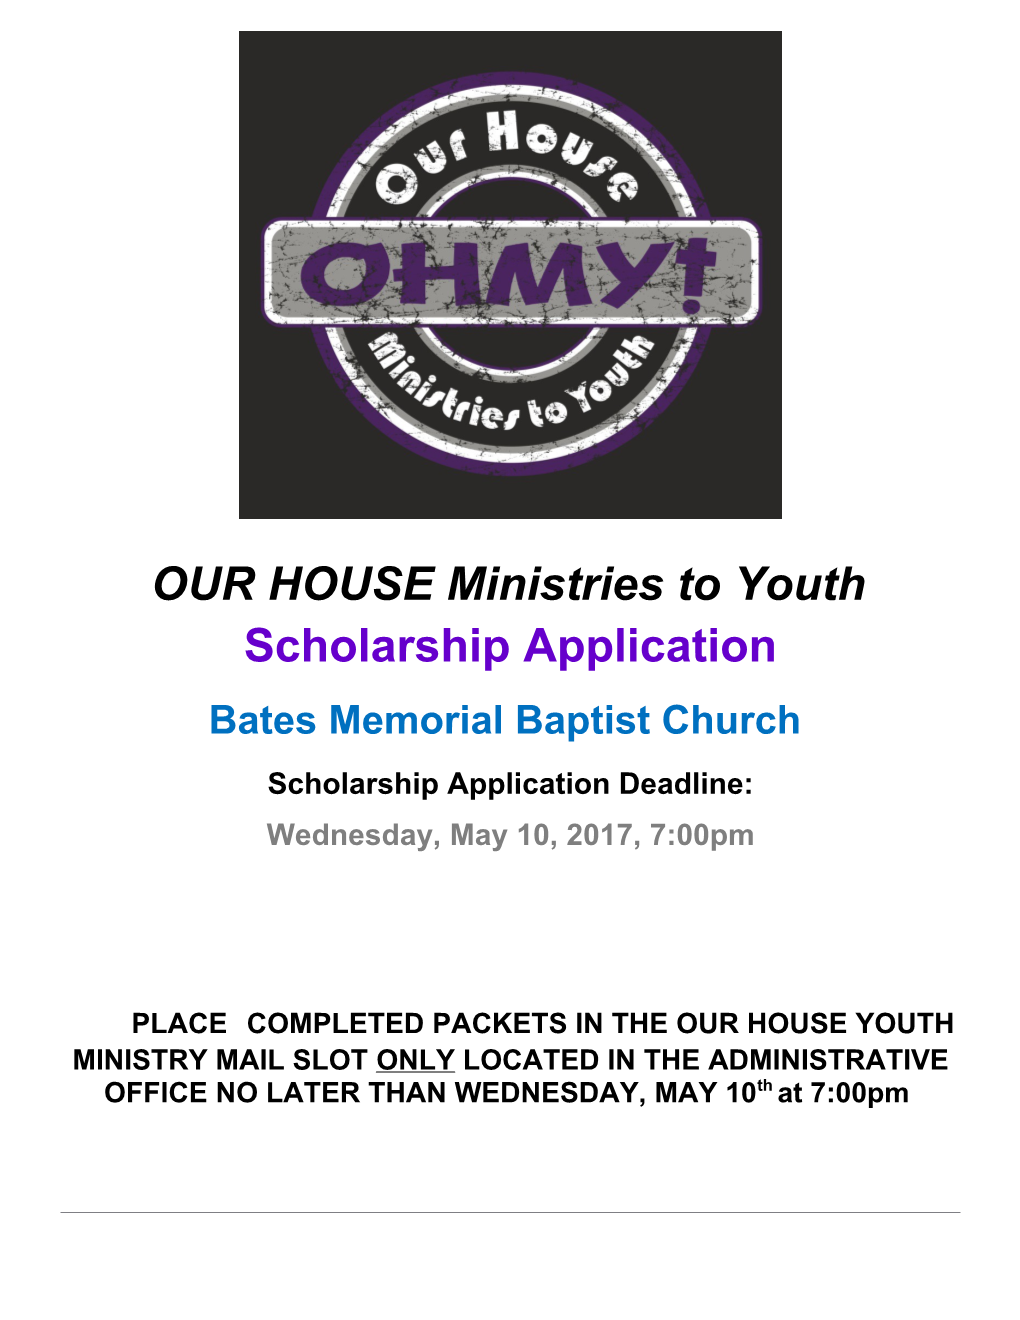 OUR HOUSE Ministries to Youth Scholarship Application